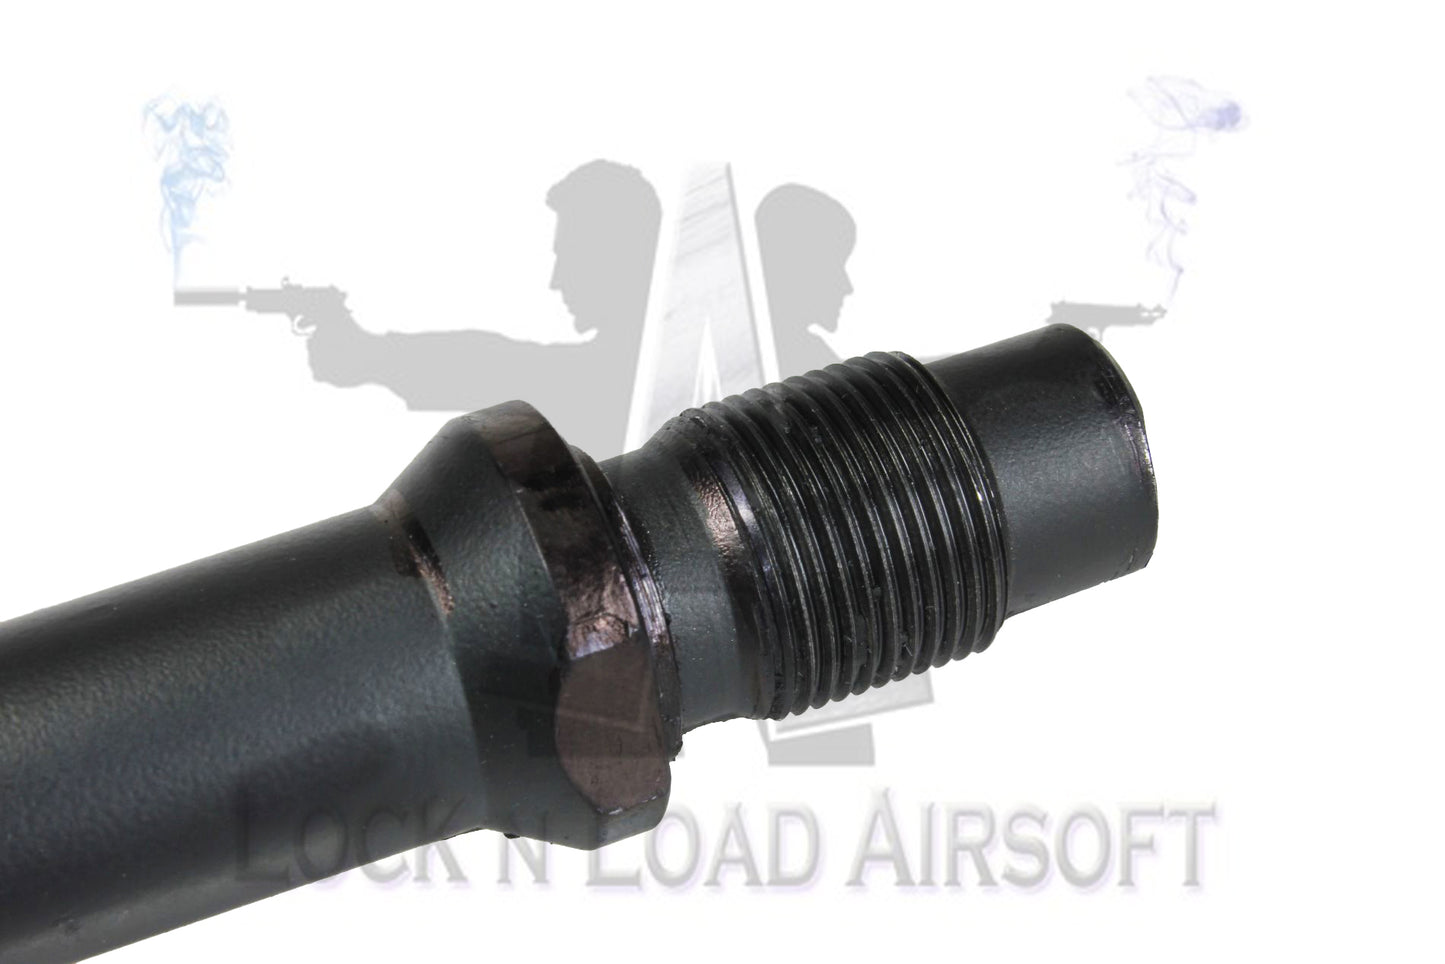 Full Metal FAL Threaded Outer Barrel Replacement With Threaded Muzzle